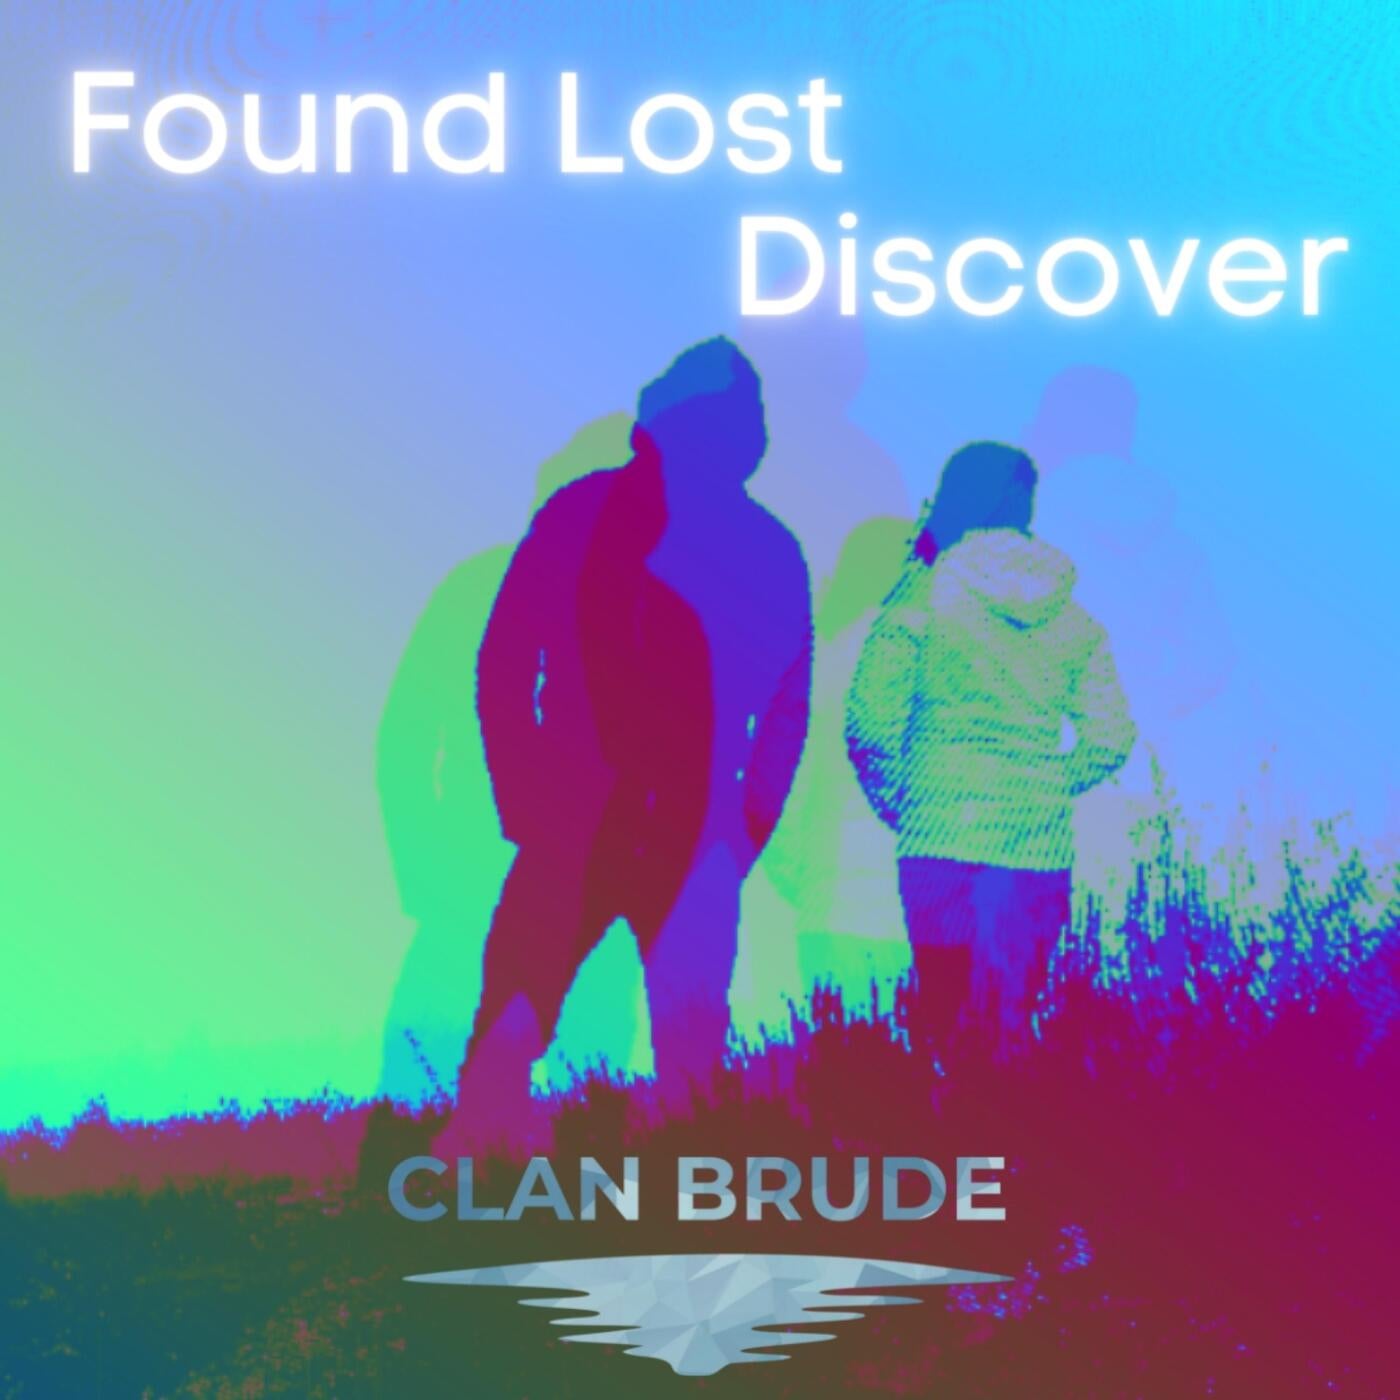 Discover found out